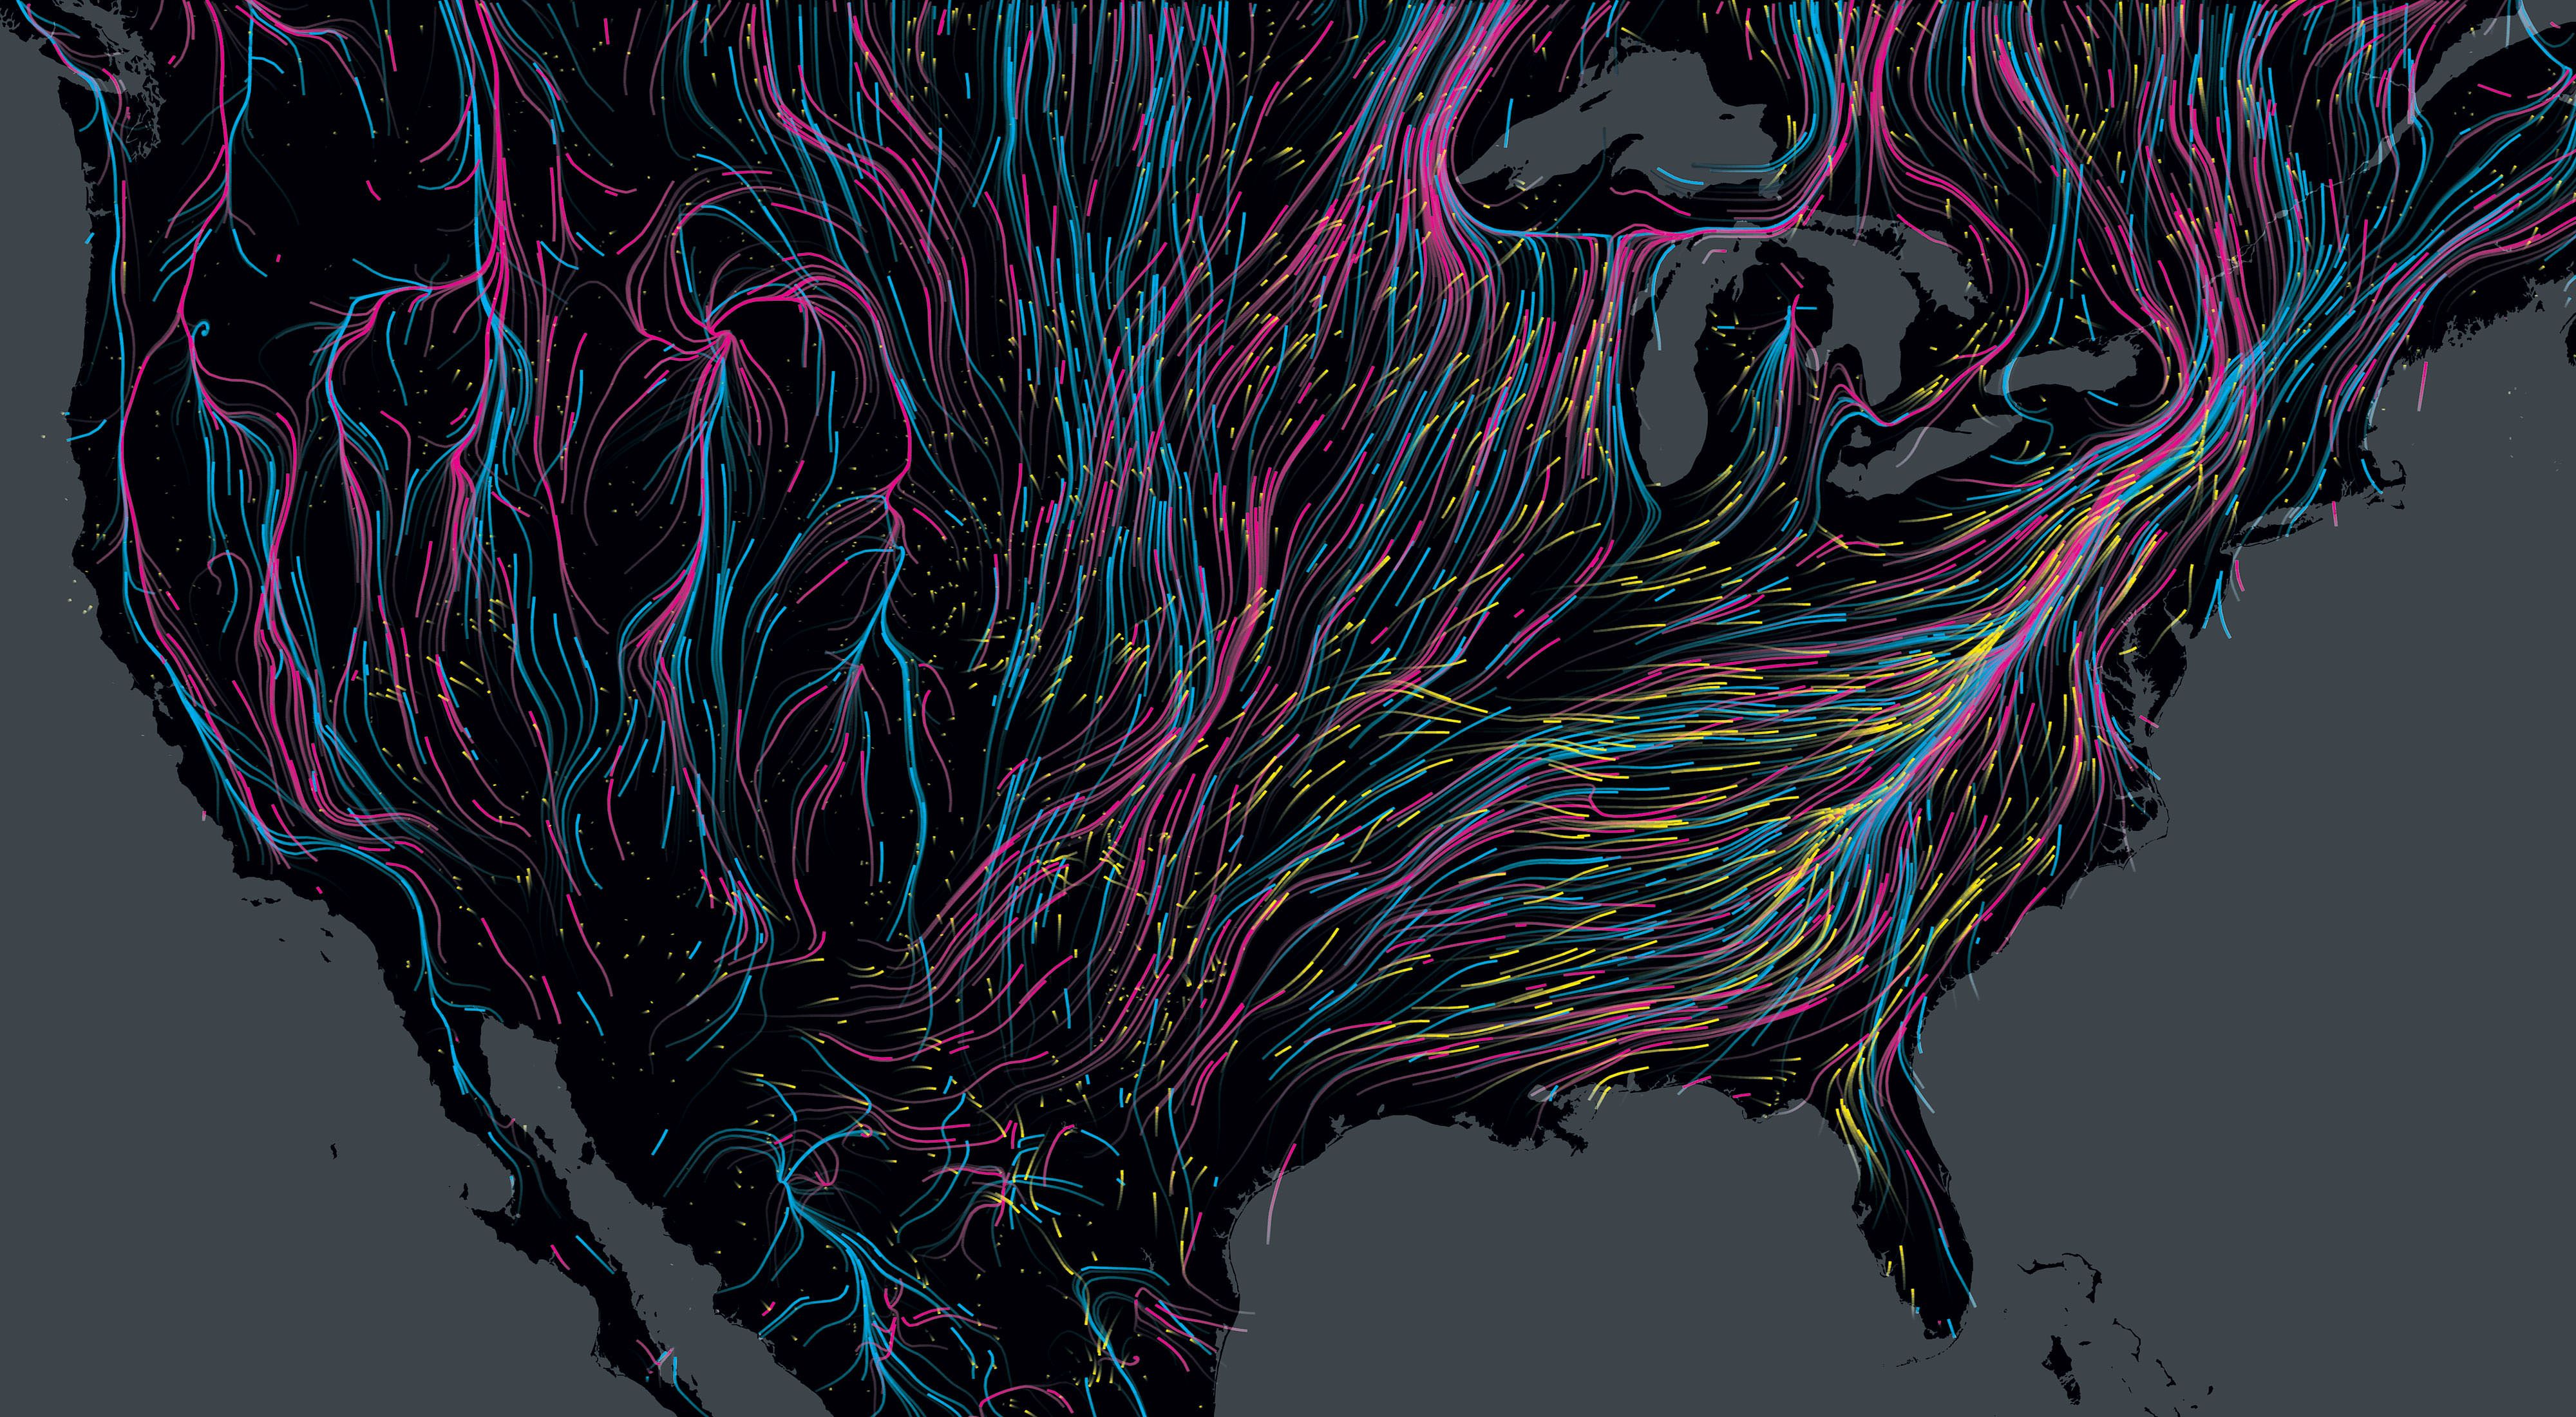 A map of the United States is crisscrossed with the colorful paths different animals take as they migrate.